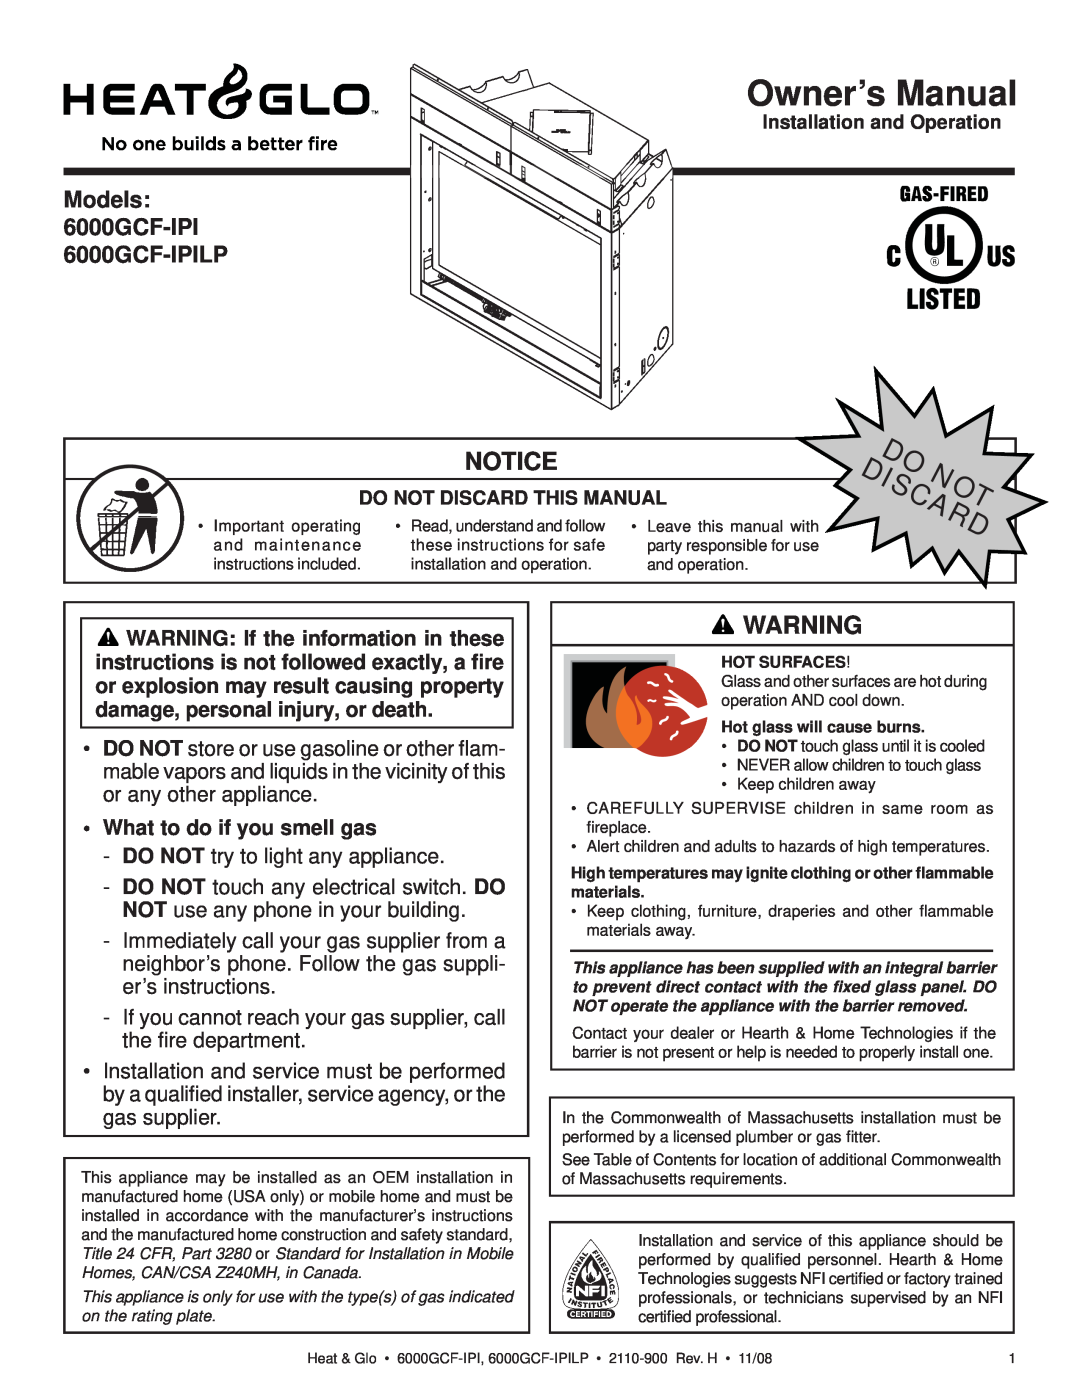 Hearth and Home Technologies 6000GCF-IPIL owner manual What to do if you smell gas, Owner’s Manual 